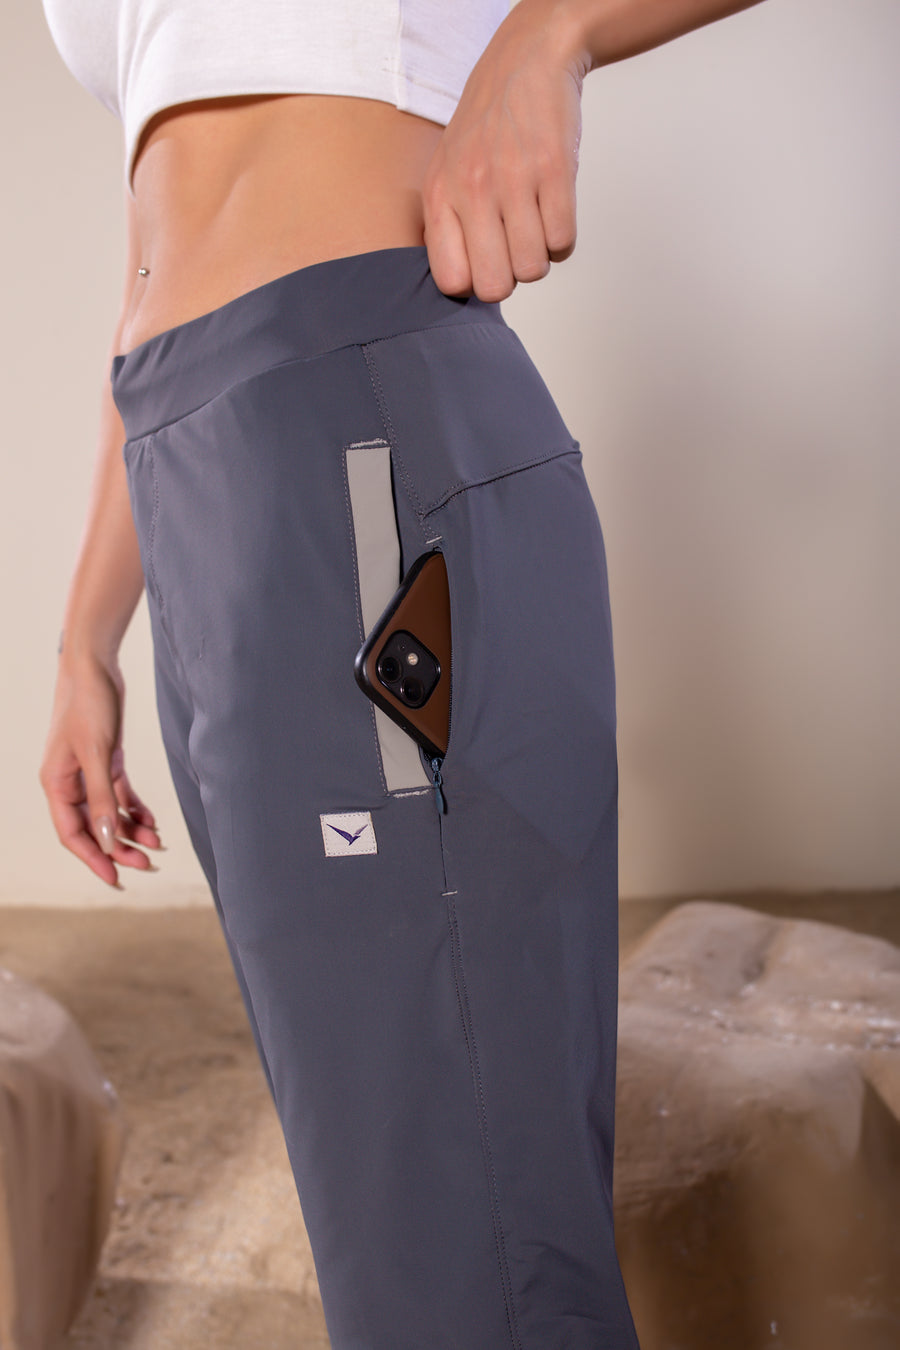 Women's Wanderlust Pant Dark Gray | VOLO Apparel | These pants are designed to give you wanderlust, an ultralight super durable athletic pant with a five pocket design, a 3 point gusset for all your movements and a high ankle tapered bottom. The revolutional Italian nylon is patented with UPF 50 protection and extreme breathability. The one pant to go everywhere and do everything!